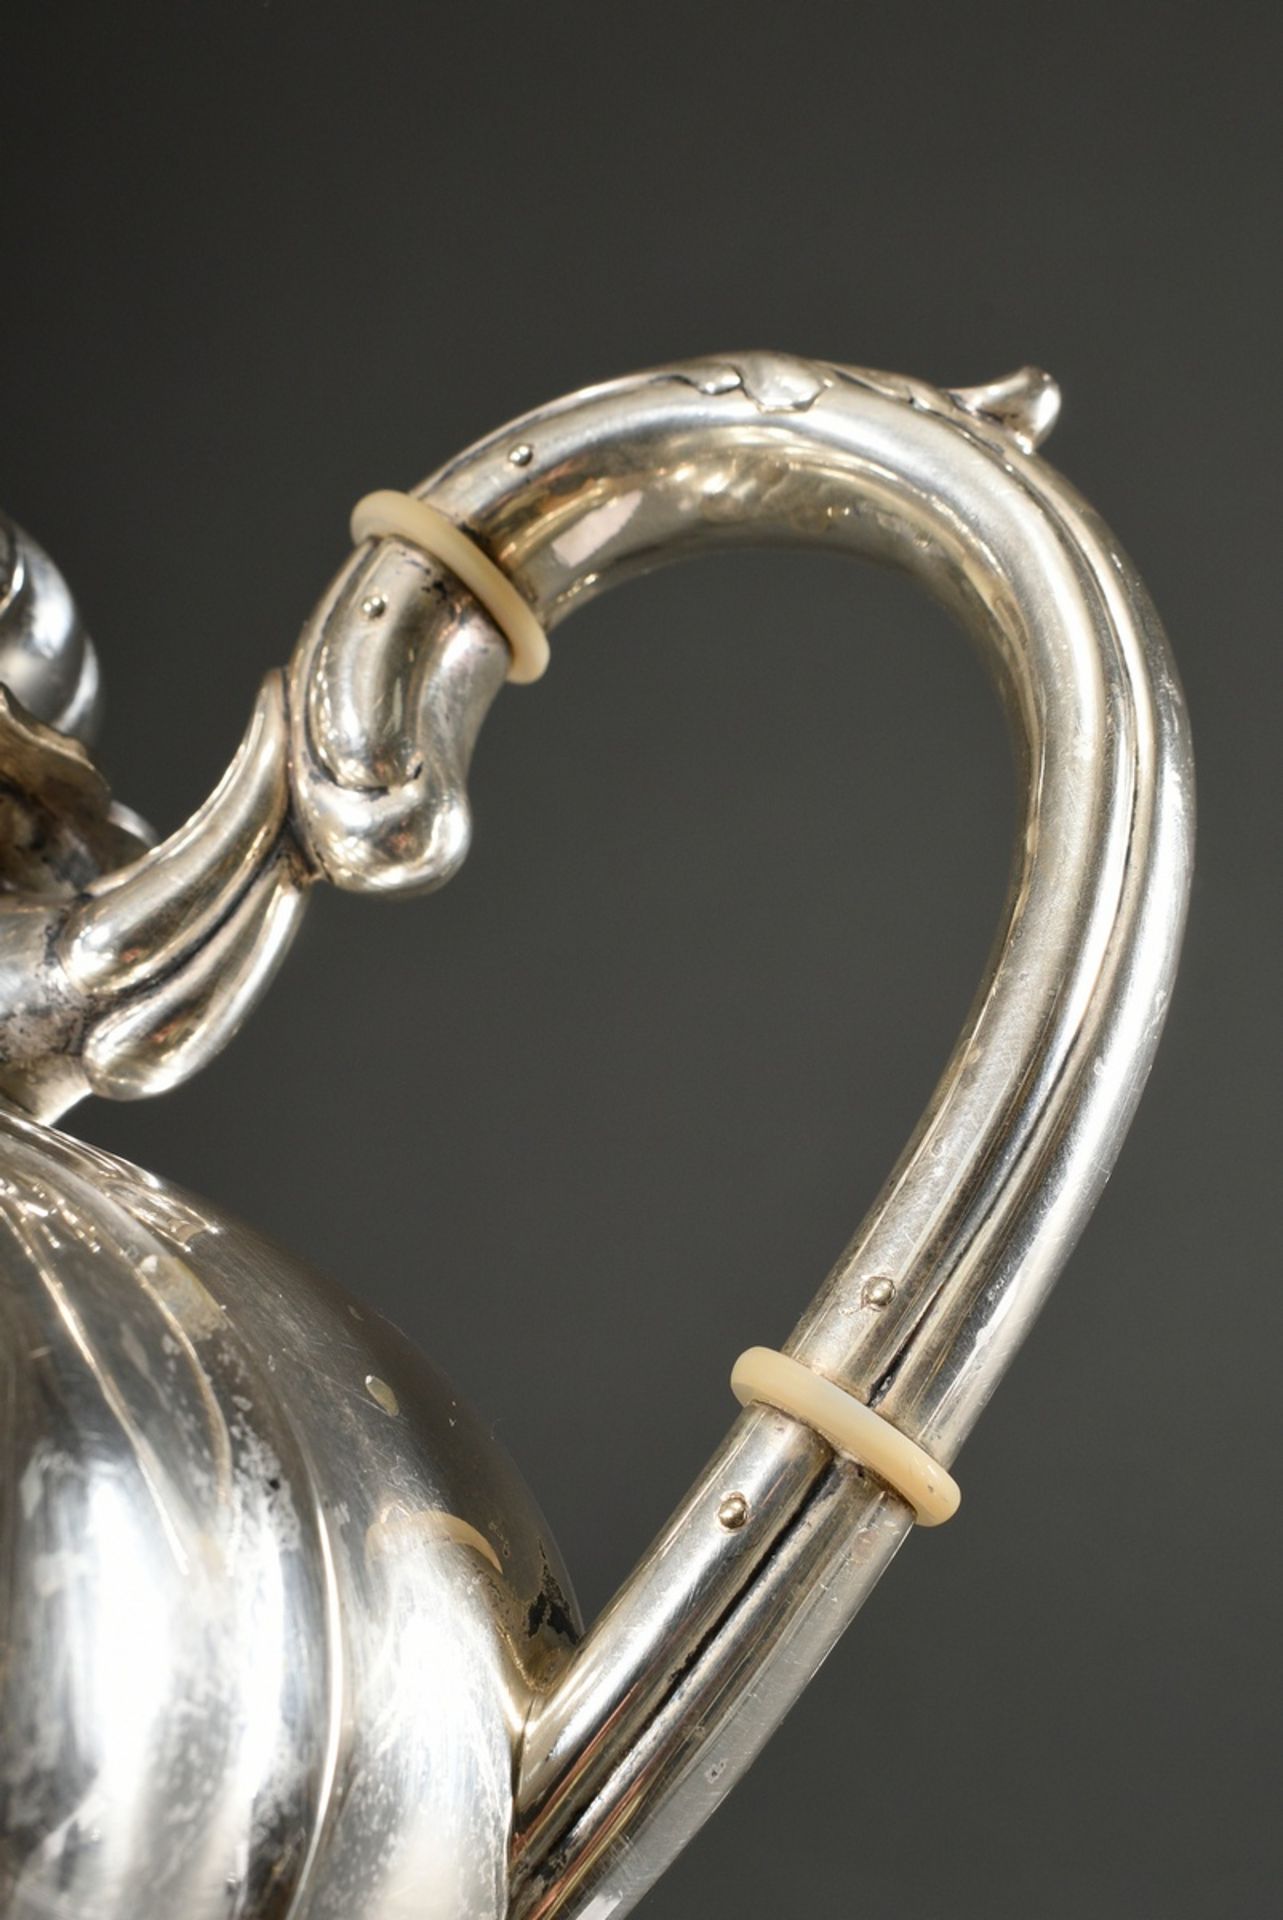 3 Piece tea service with gadrooned body in baroque façon, Wilkens, jeweller's mark: O. Breede, silv - Image 4 of 7